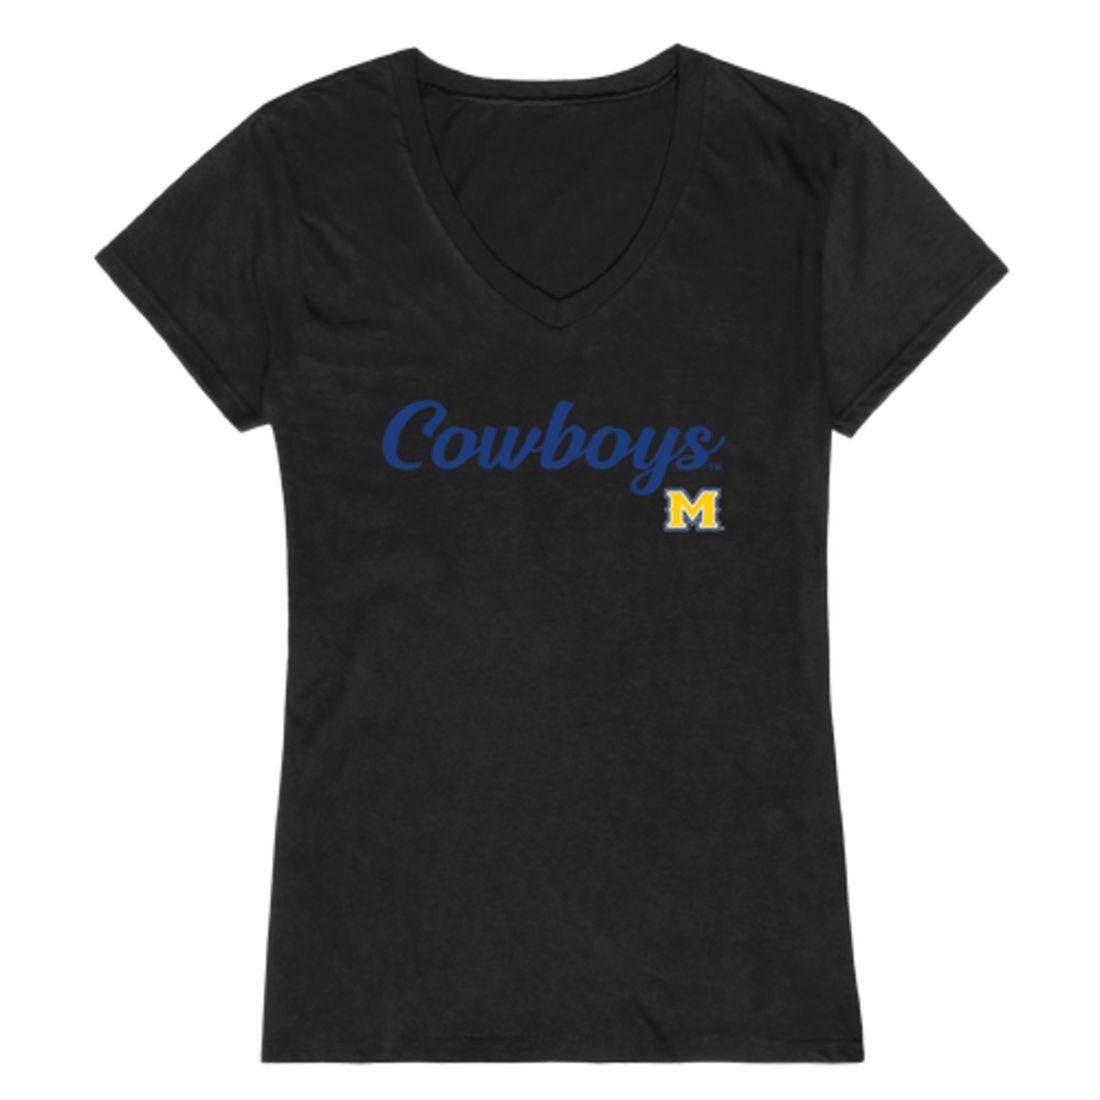 McNeese State University Cowboys and Cowgirls Womens Script Tee T-Shirt-Campus-Wardrobe